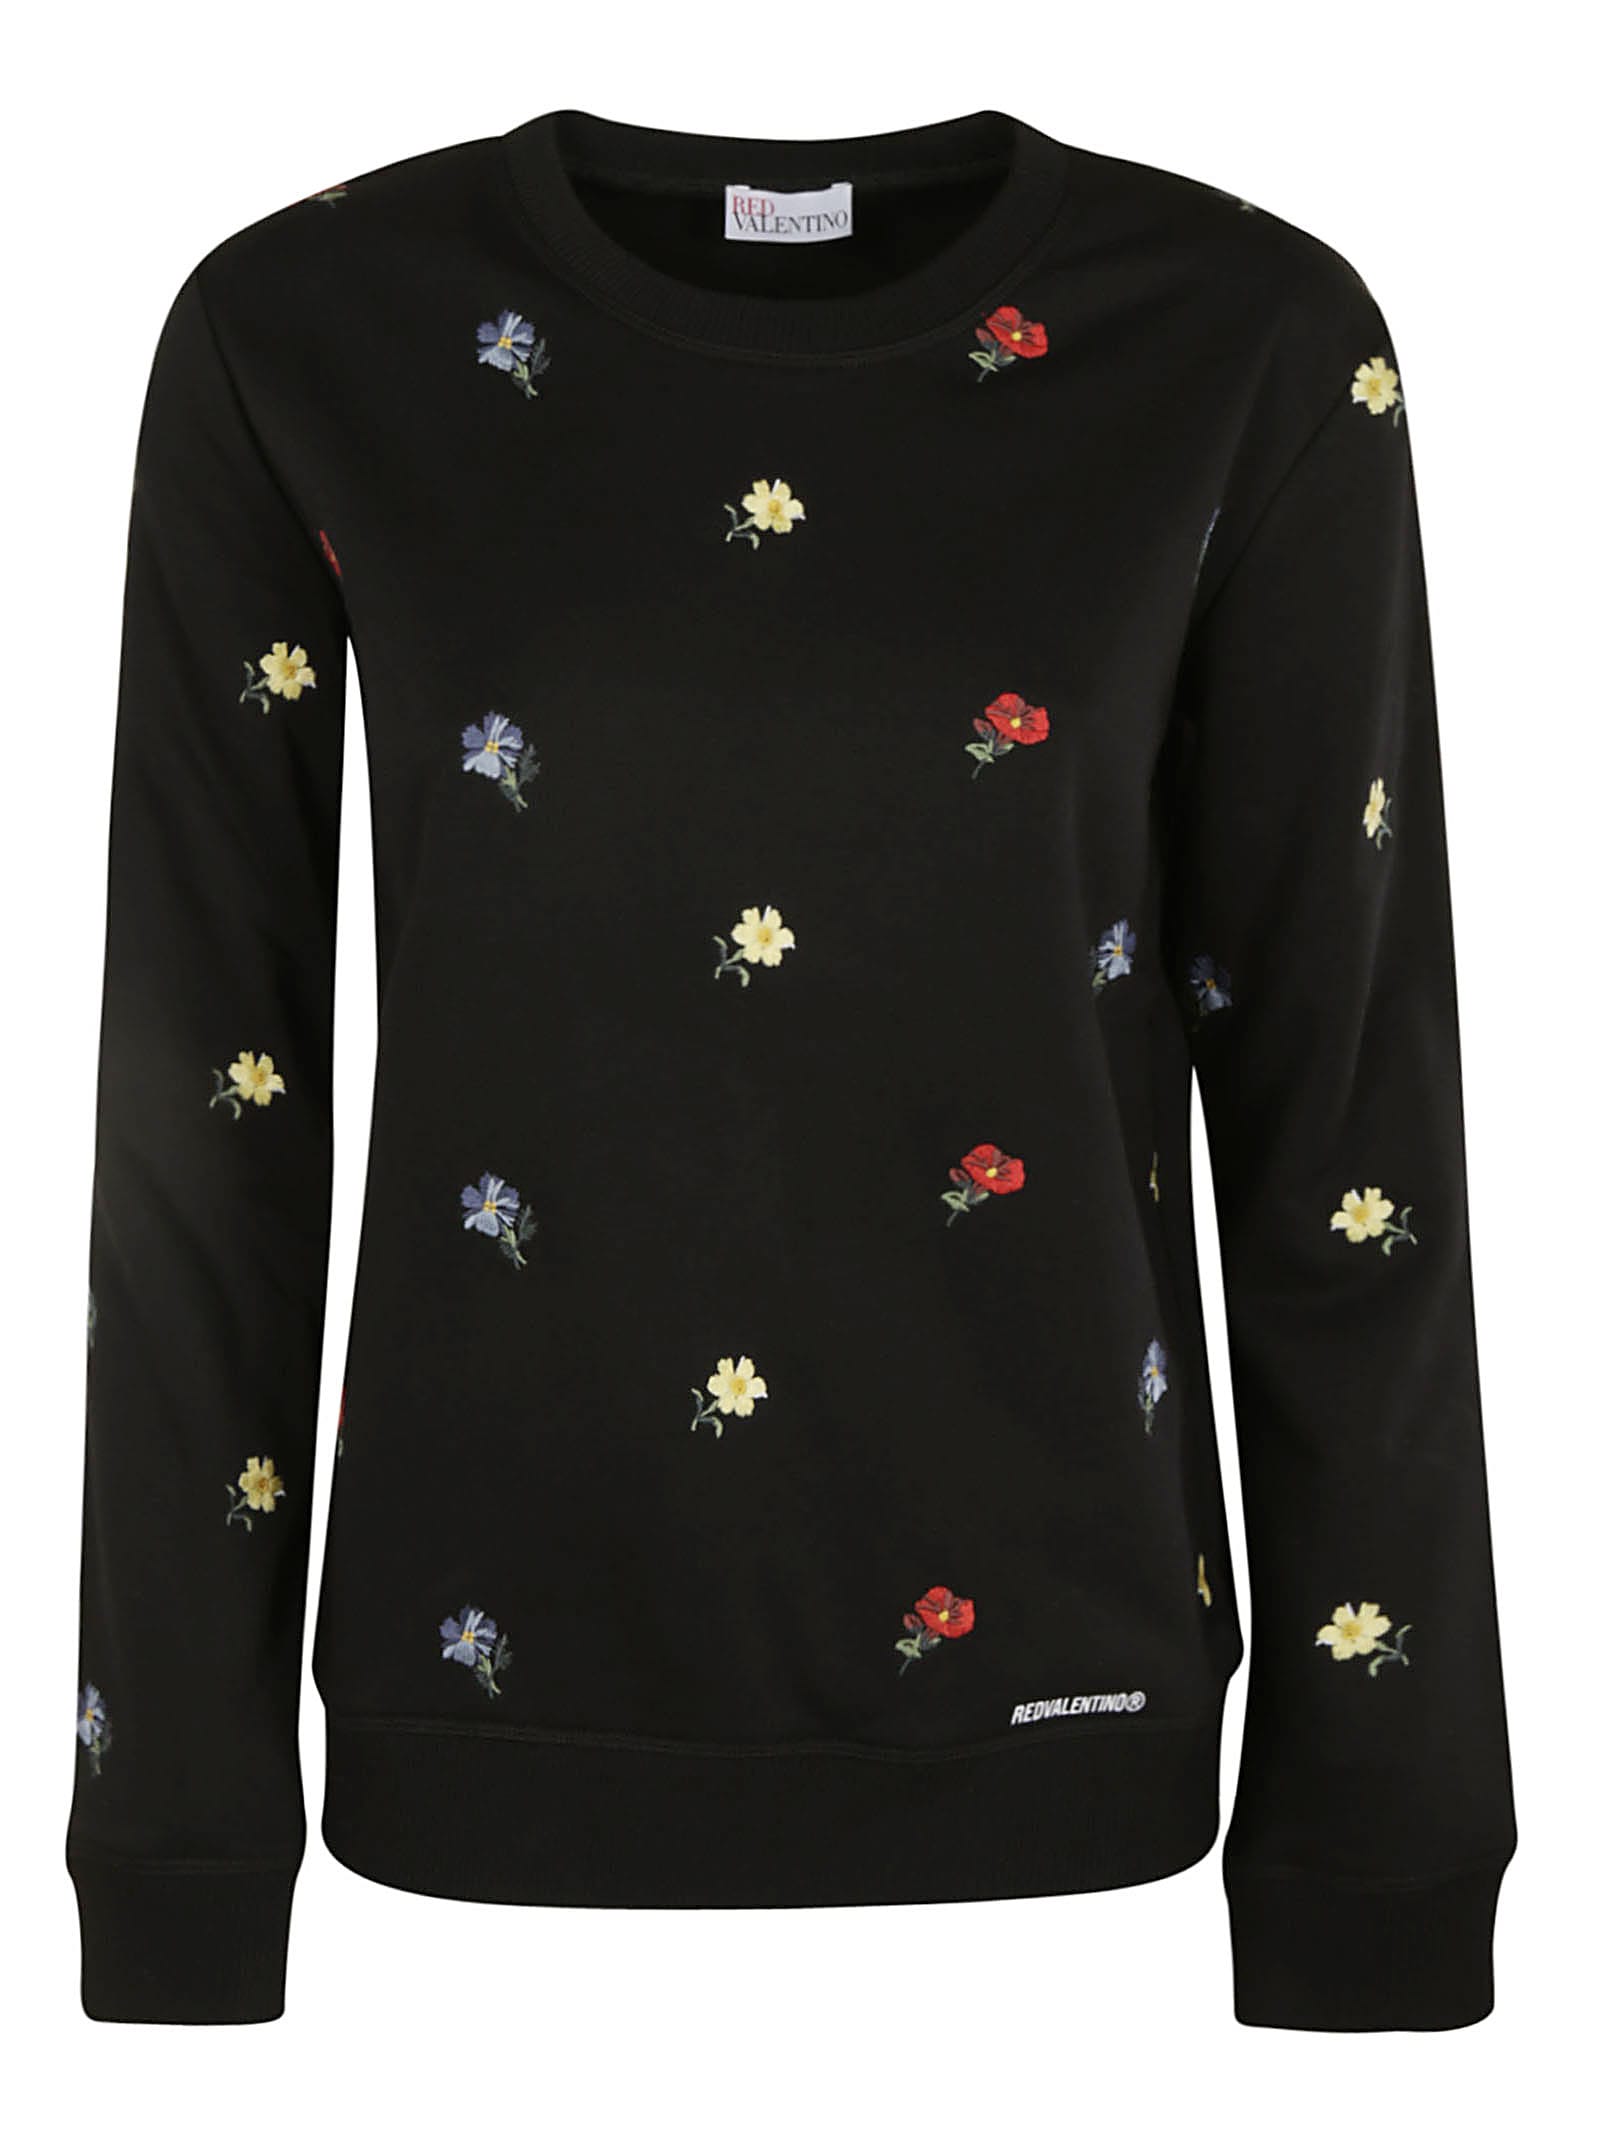 RED Valentino Floral Embroidered Sweatshirt